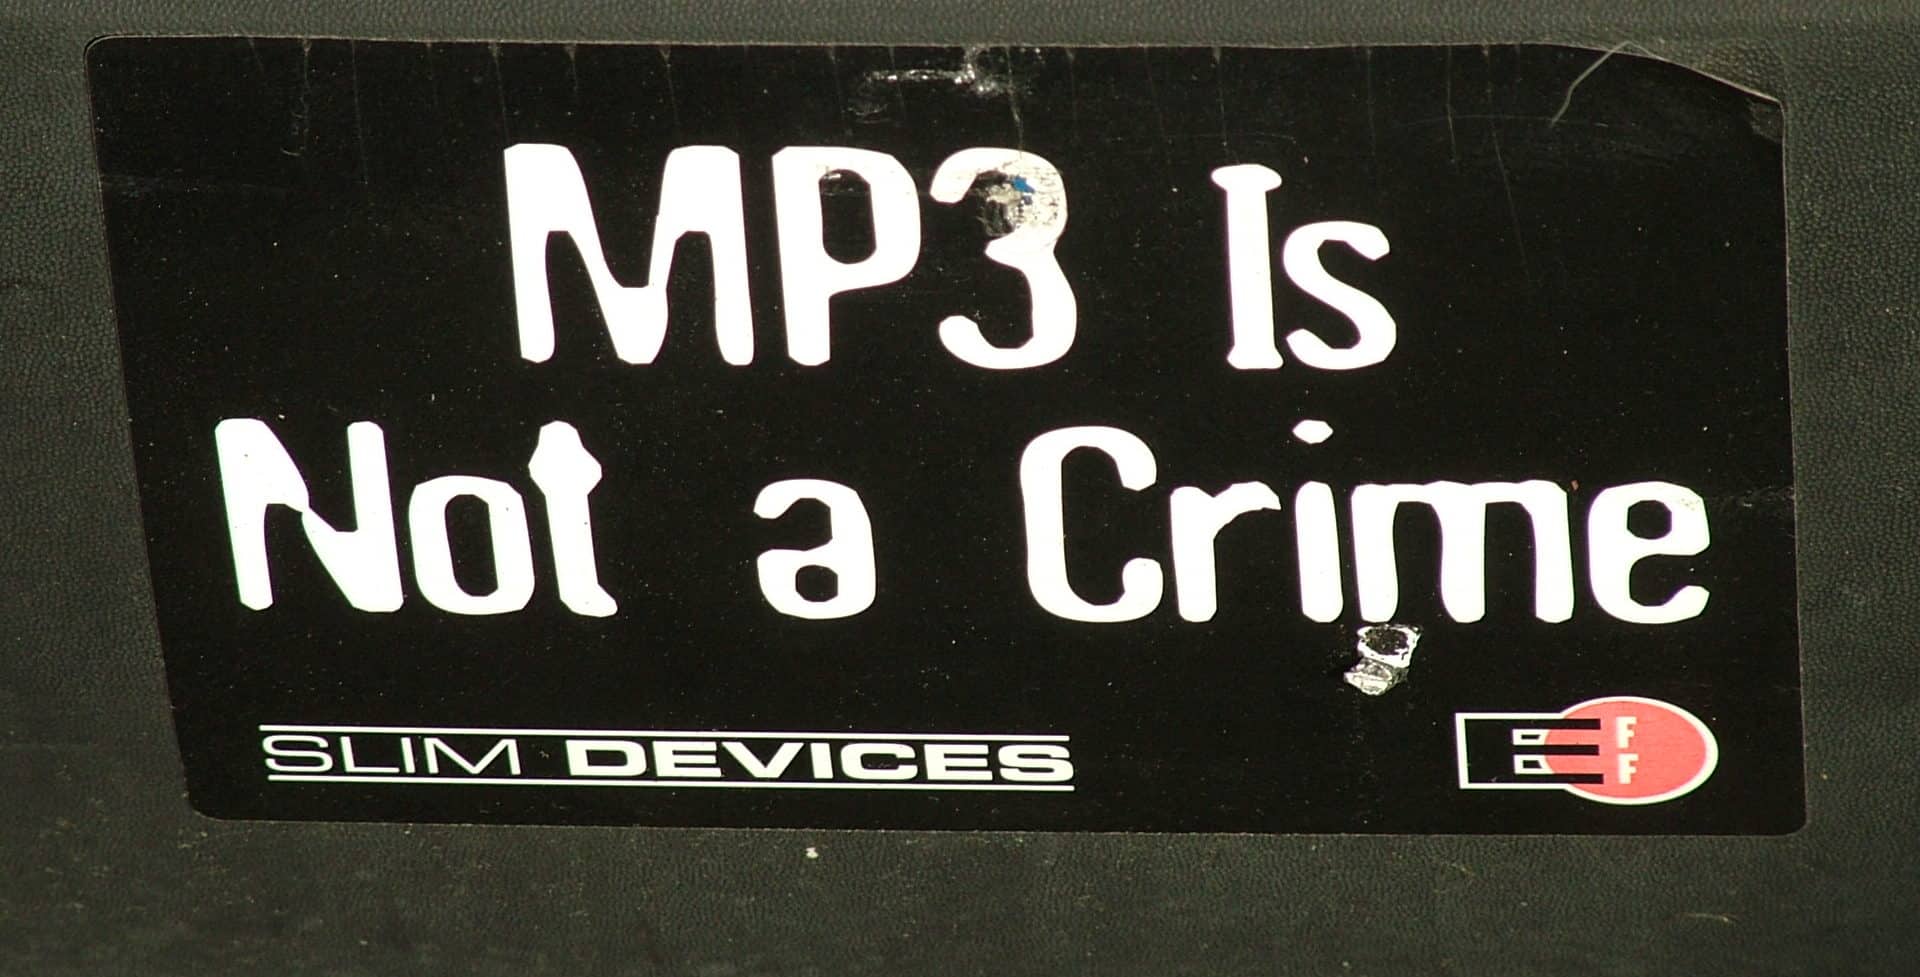 Anti-anti-piracy sticker on a laptop saying 'MP3 IS NOT A CRIME' But encoding in Joint or Mid-Side Stereo is! Photo by Tara Hunt https://www.flickr.com/photos/missrogue/90111457 Creative Commons